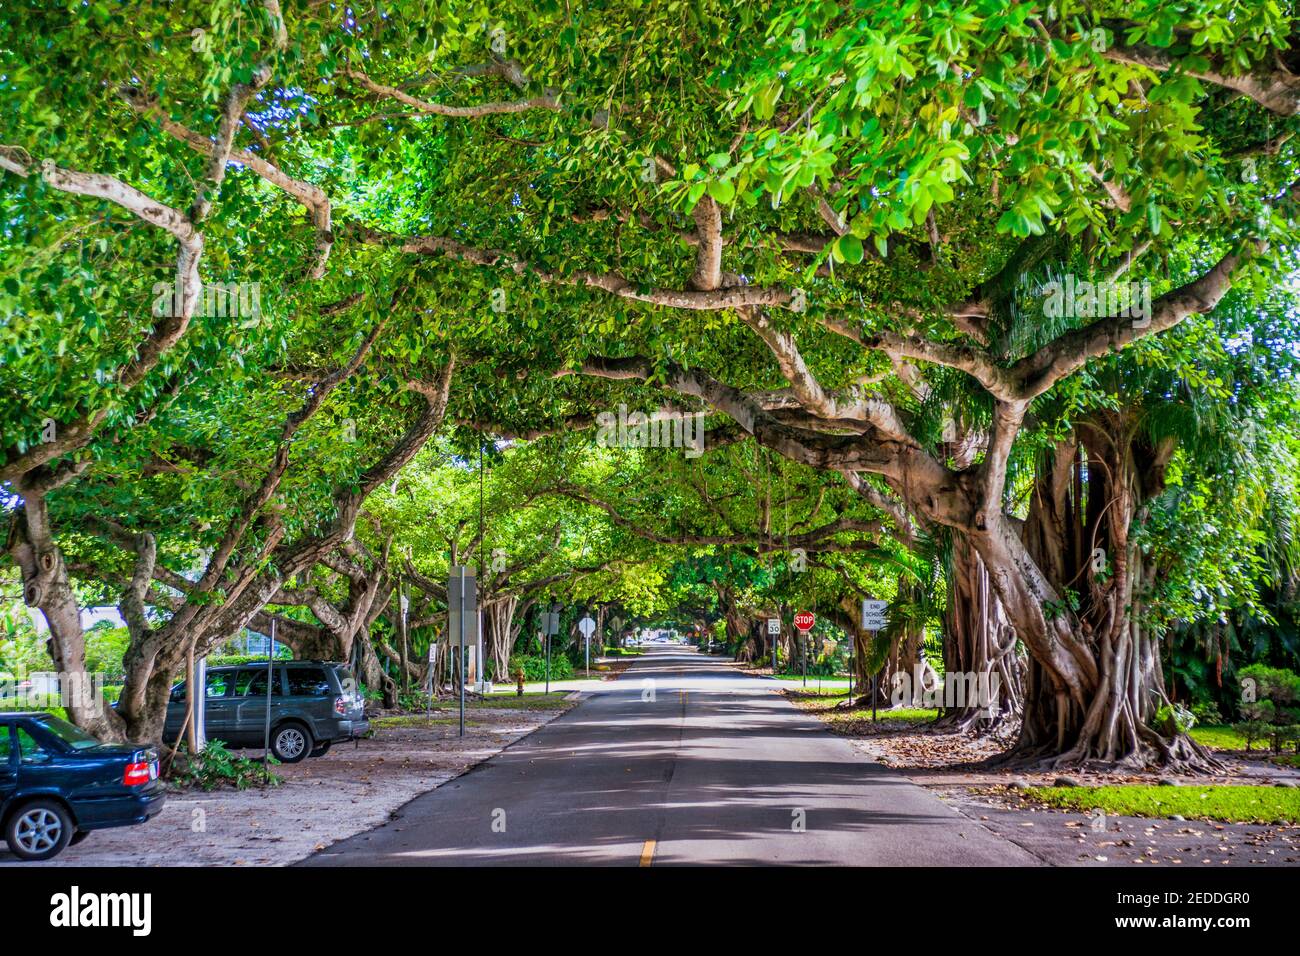 The banyan tree lined Columbus Boulevard in Coral Gables, Florida. Stock Photo